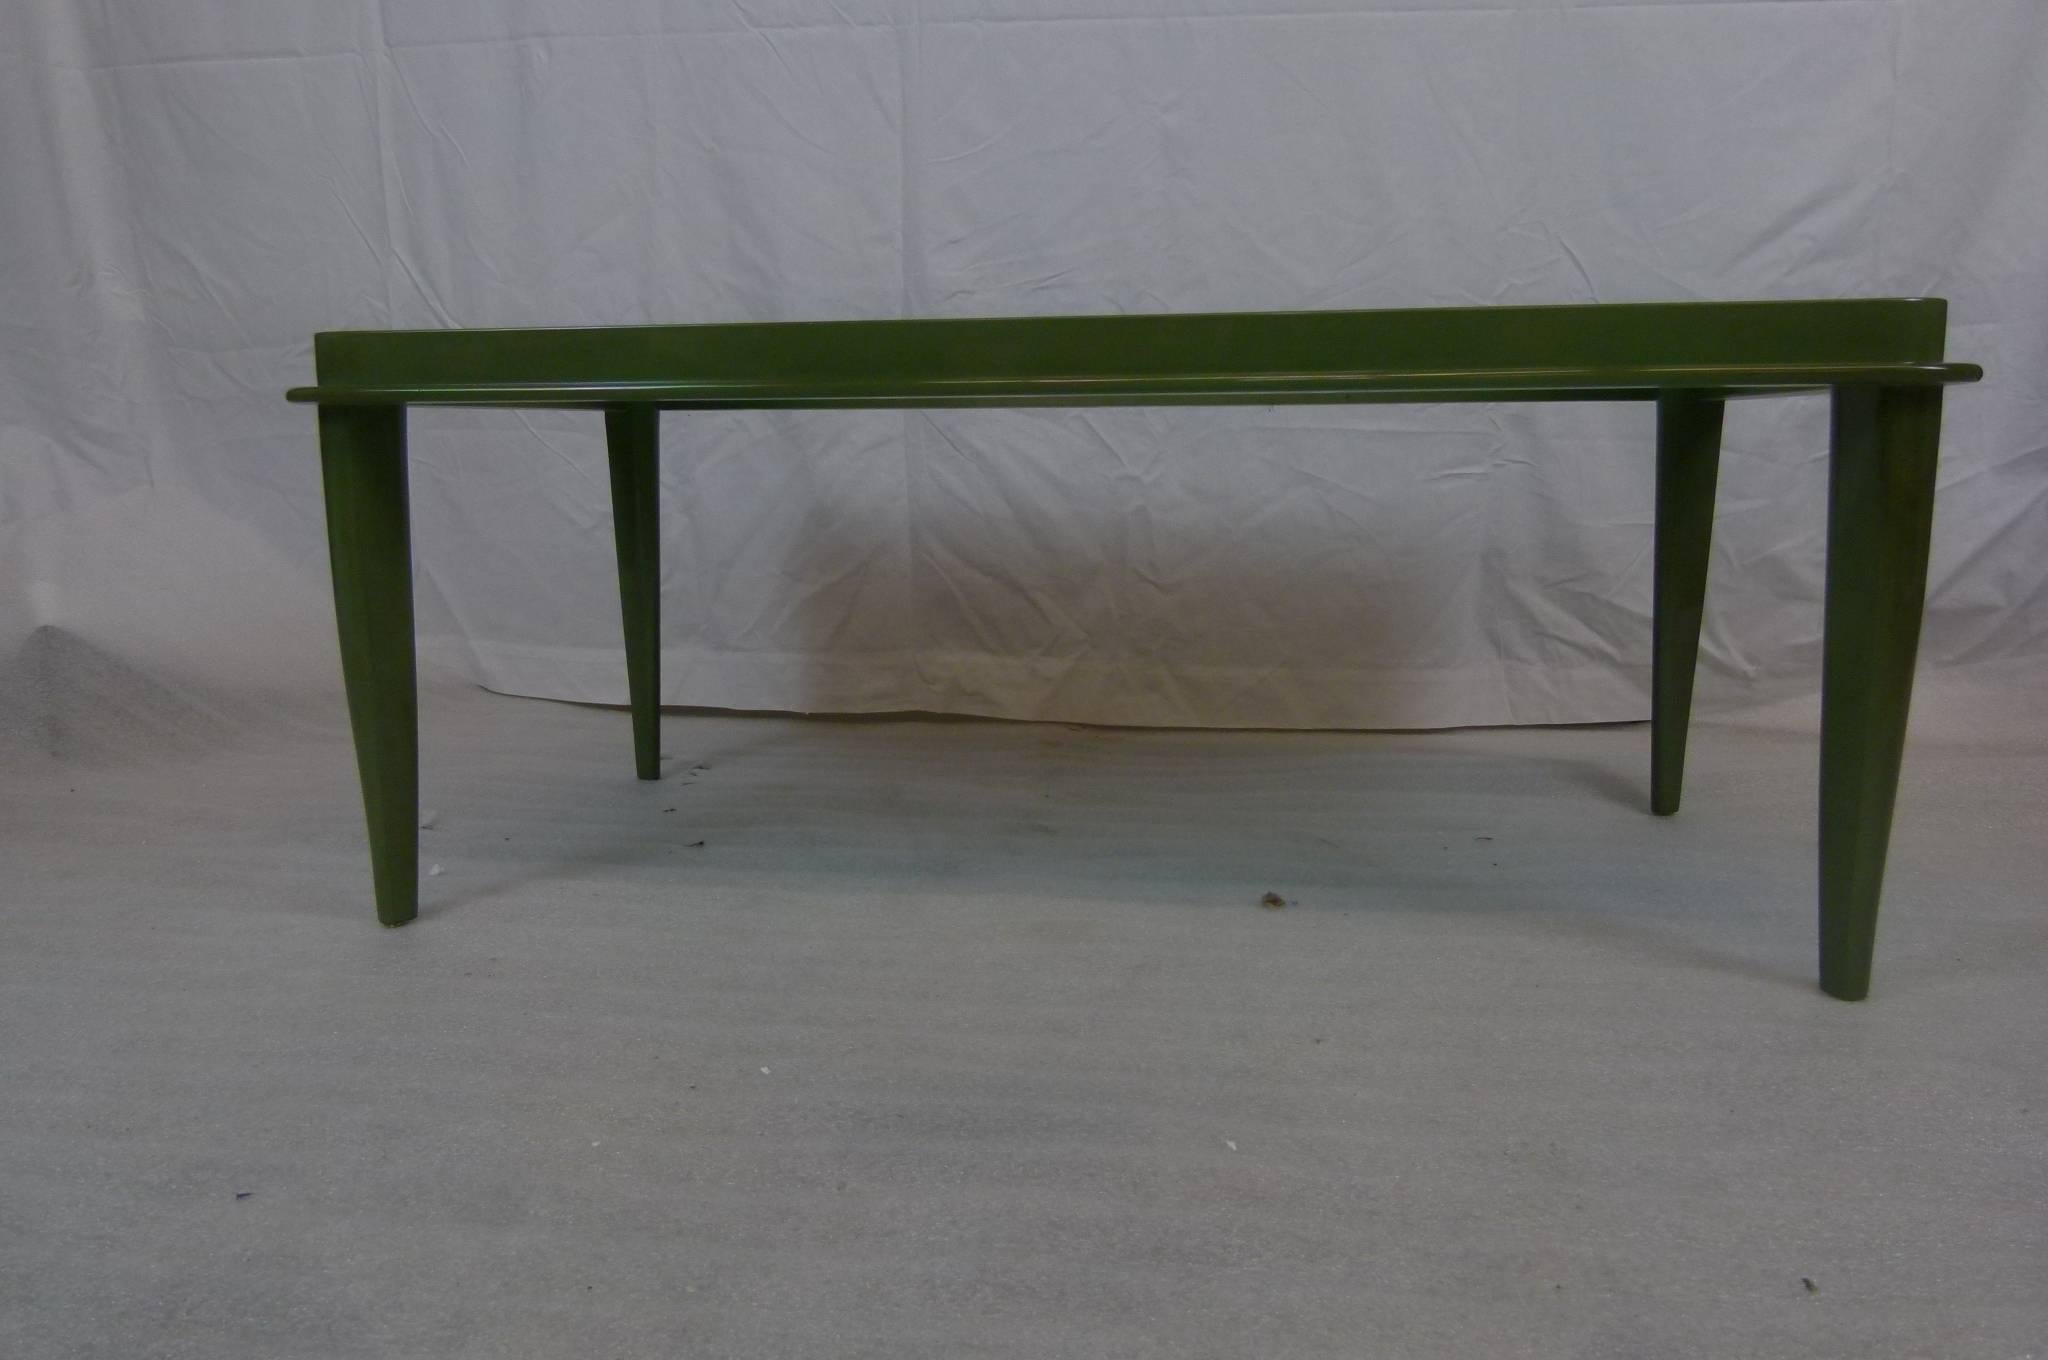 Coffee table, consisting of a rectangular tray in green lacquer, resting on four saber feet.
The periphery of the tray is set with a lacquered wooden stick.
This table has been completely restored as well as the lacquer.
1930s French Art Deco